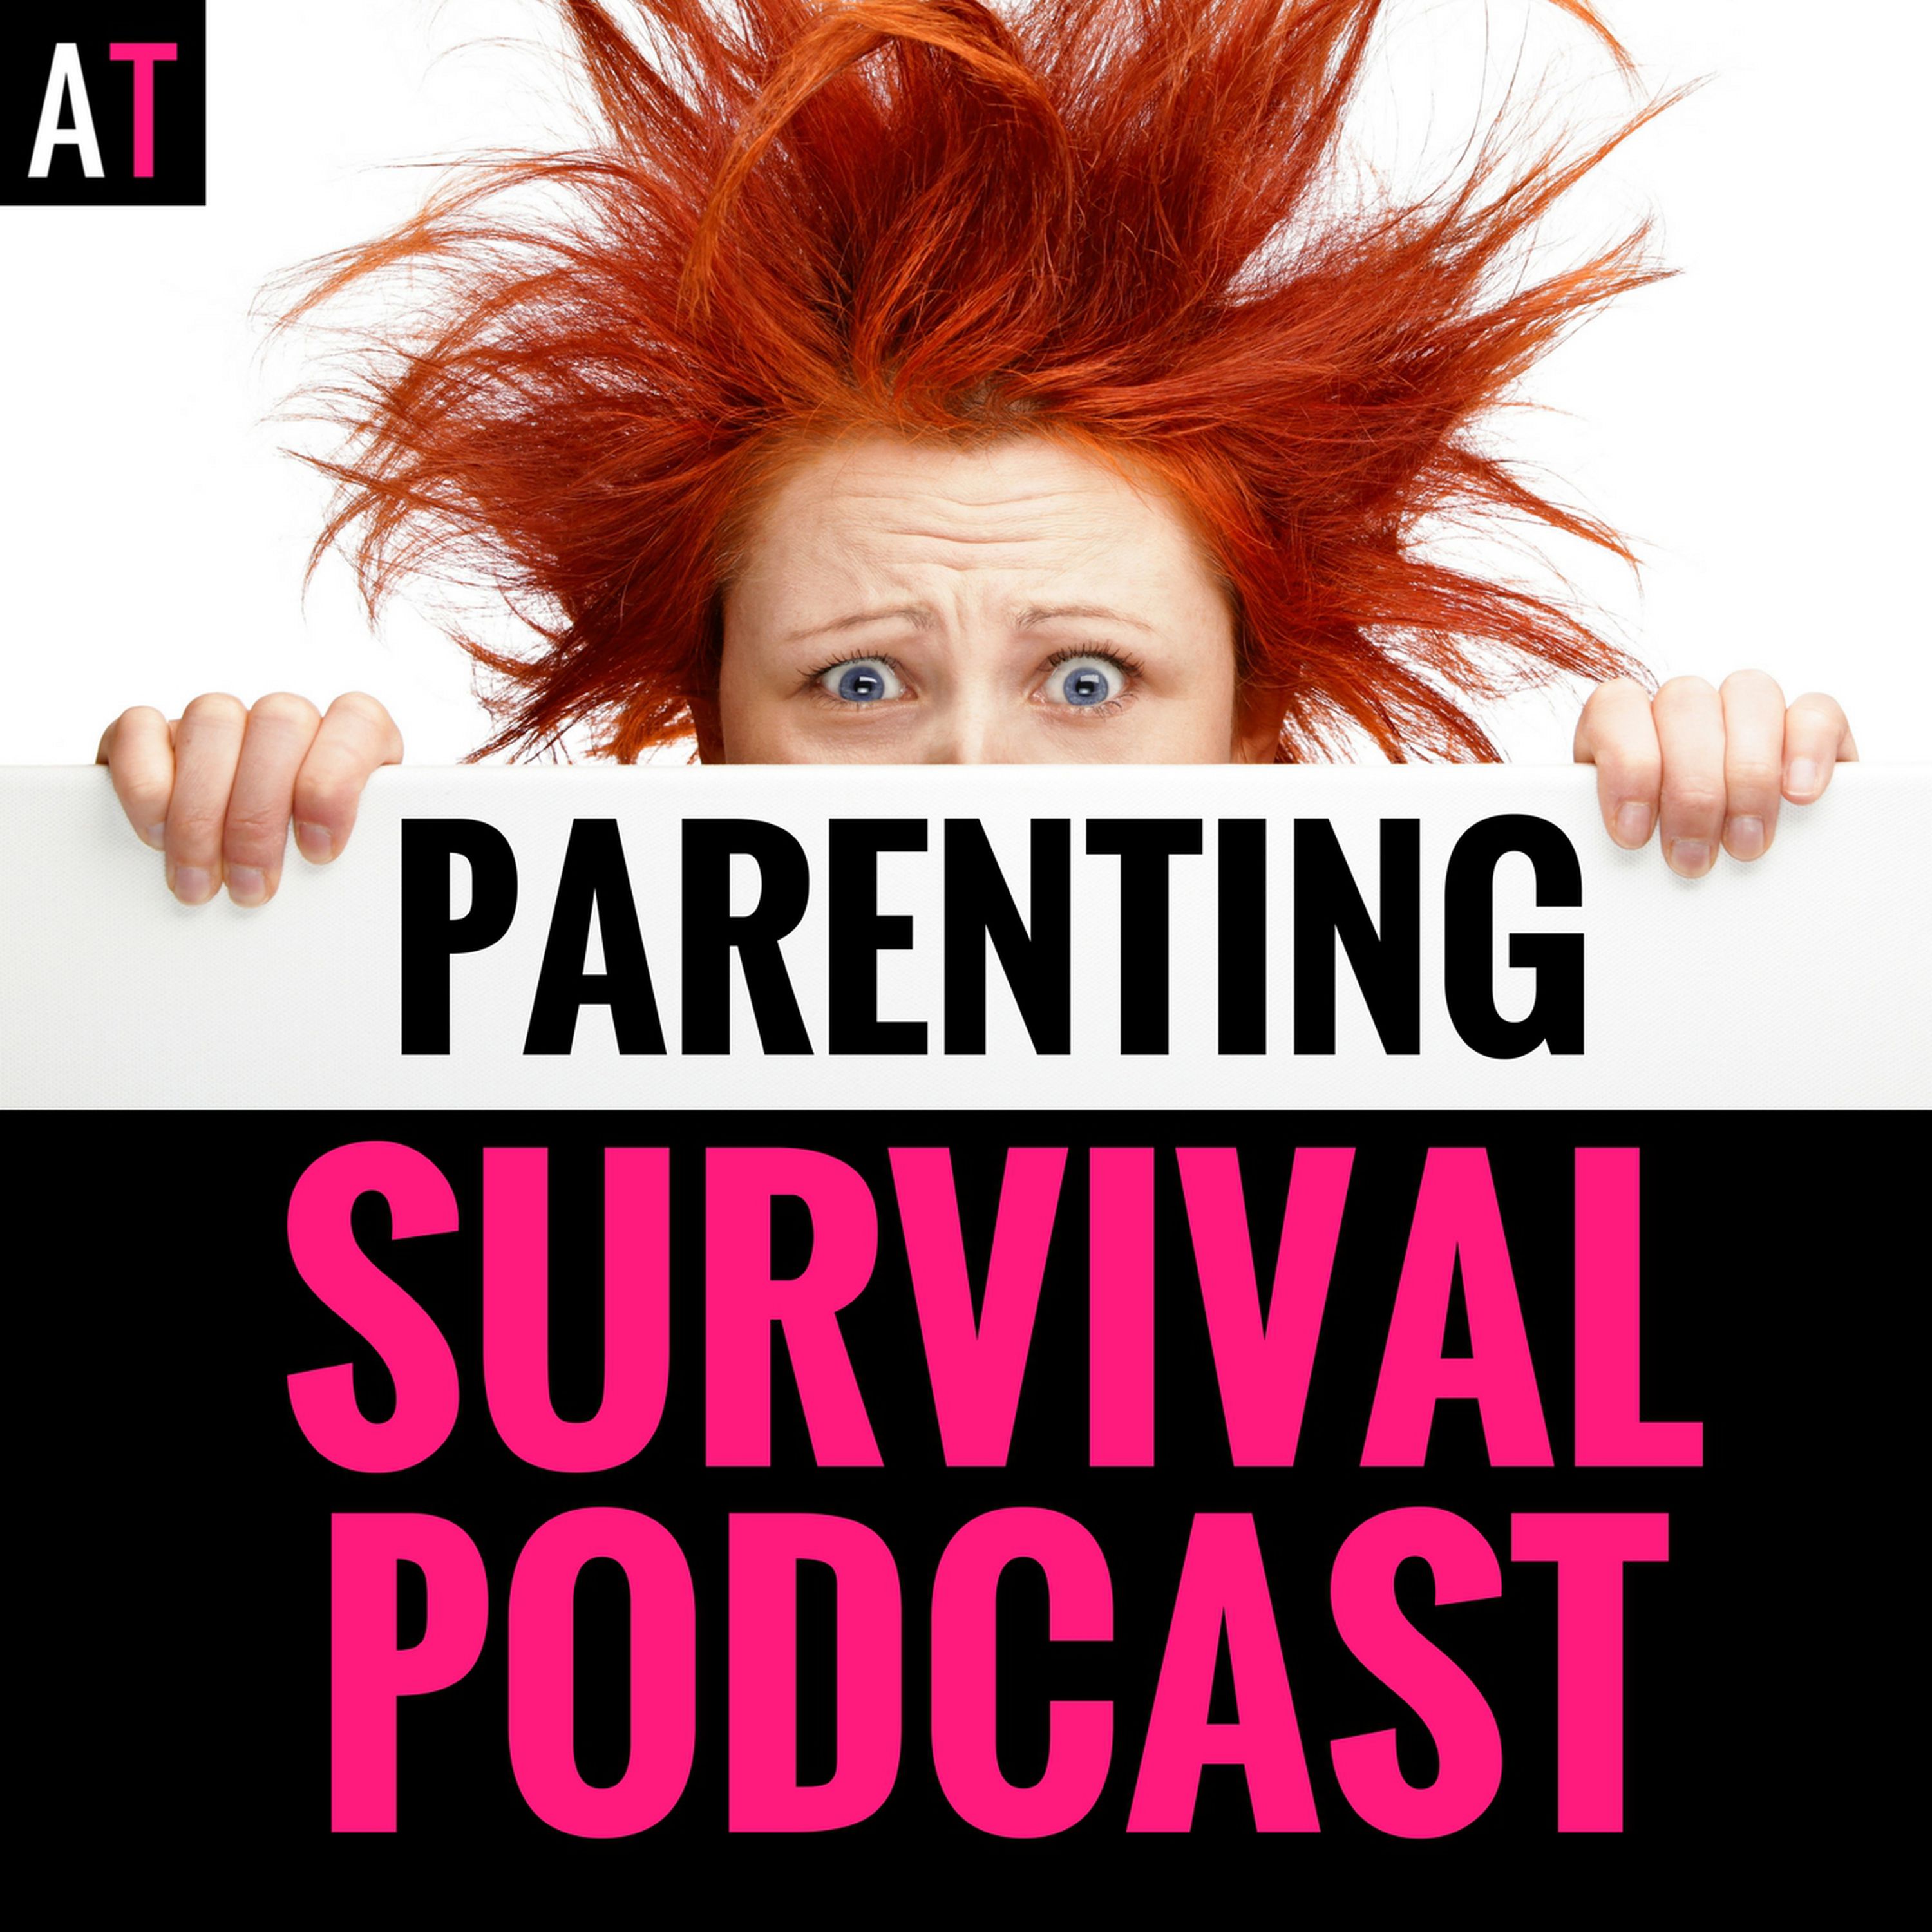 PSP 016: Anxiety Around Pooping, Toileting and the Bathroom | Not Just a Toddler Potty Training Issue